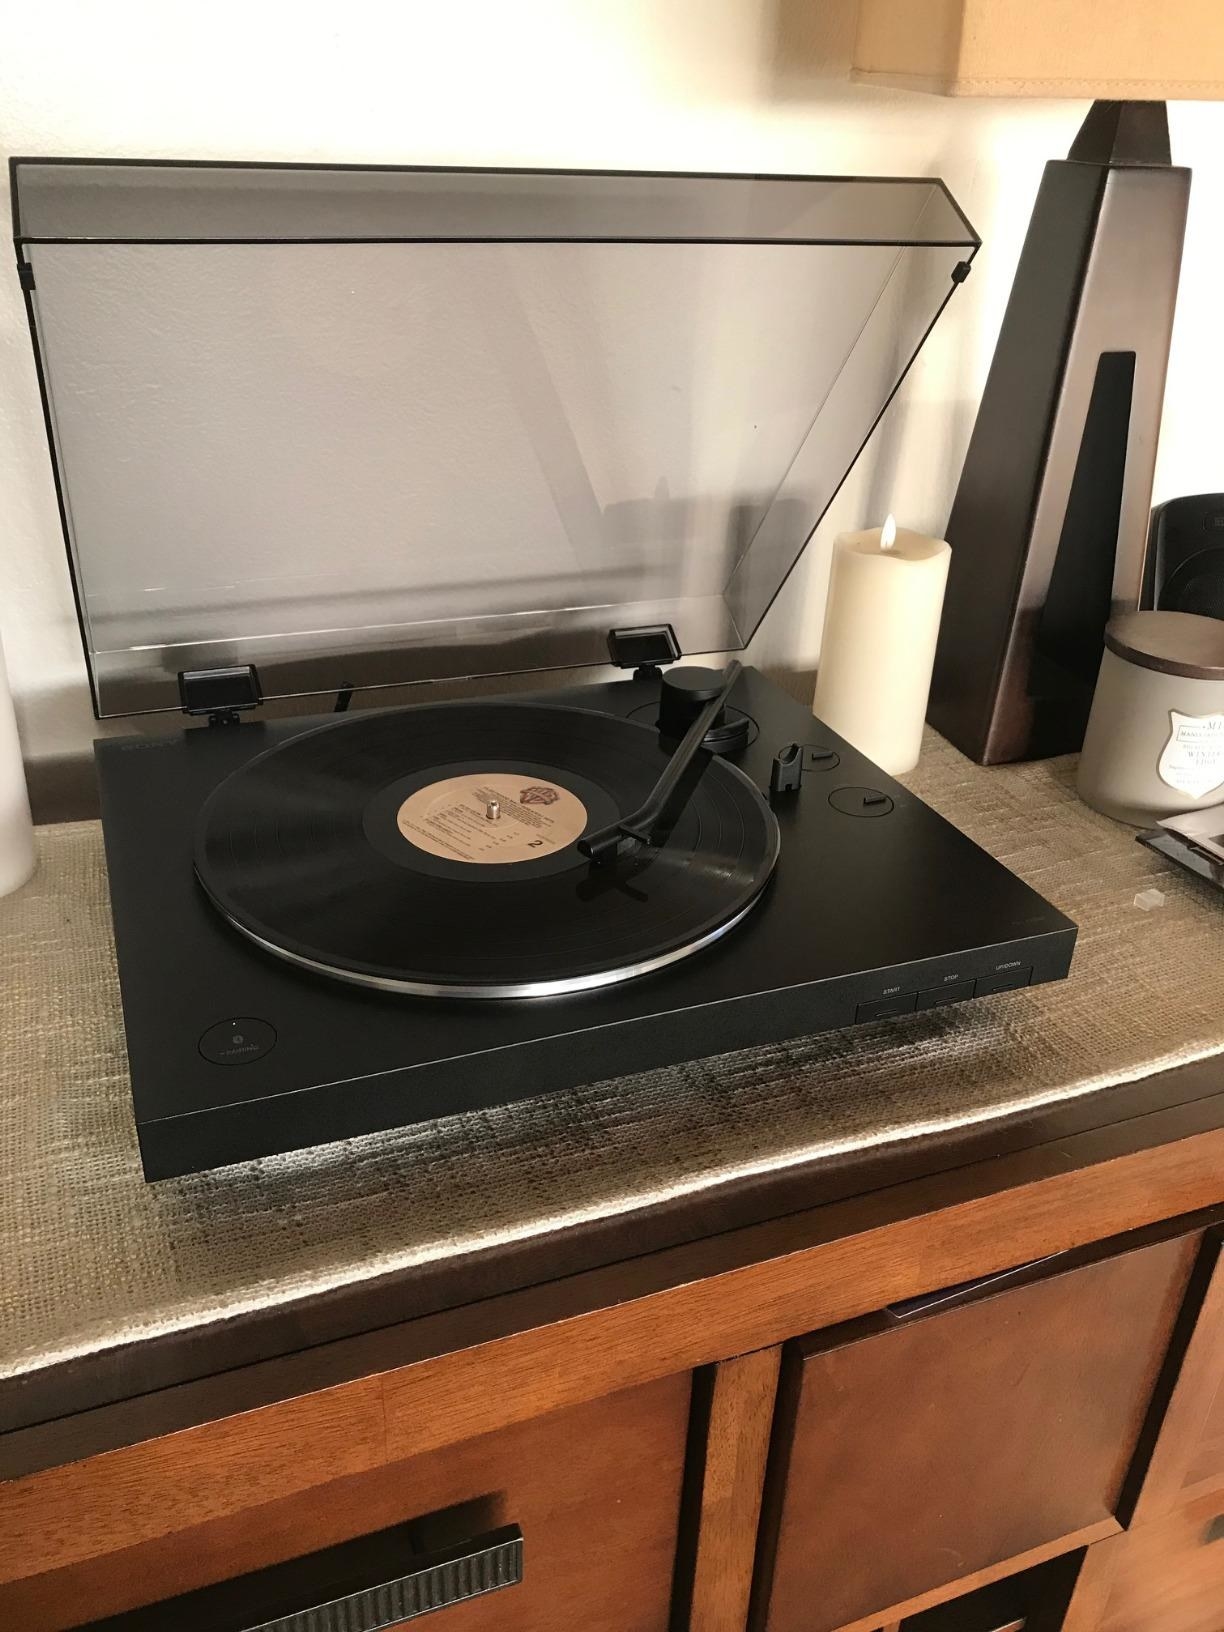 the wireless record player with a record in the the turntable and the top open